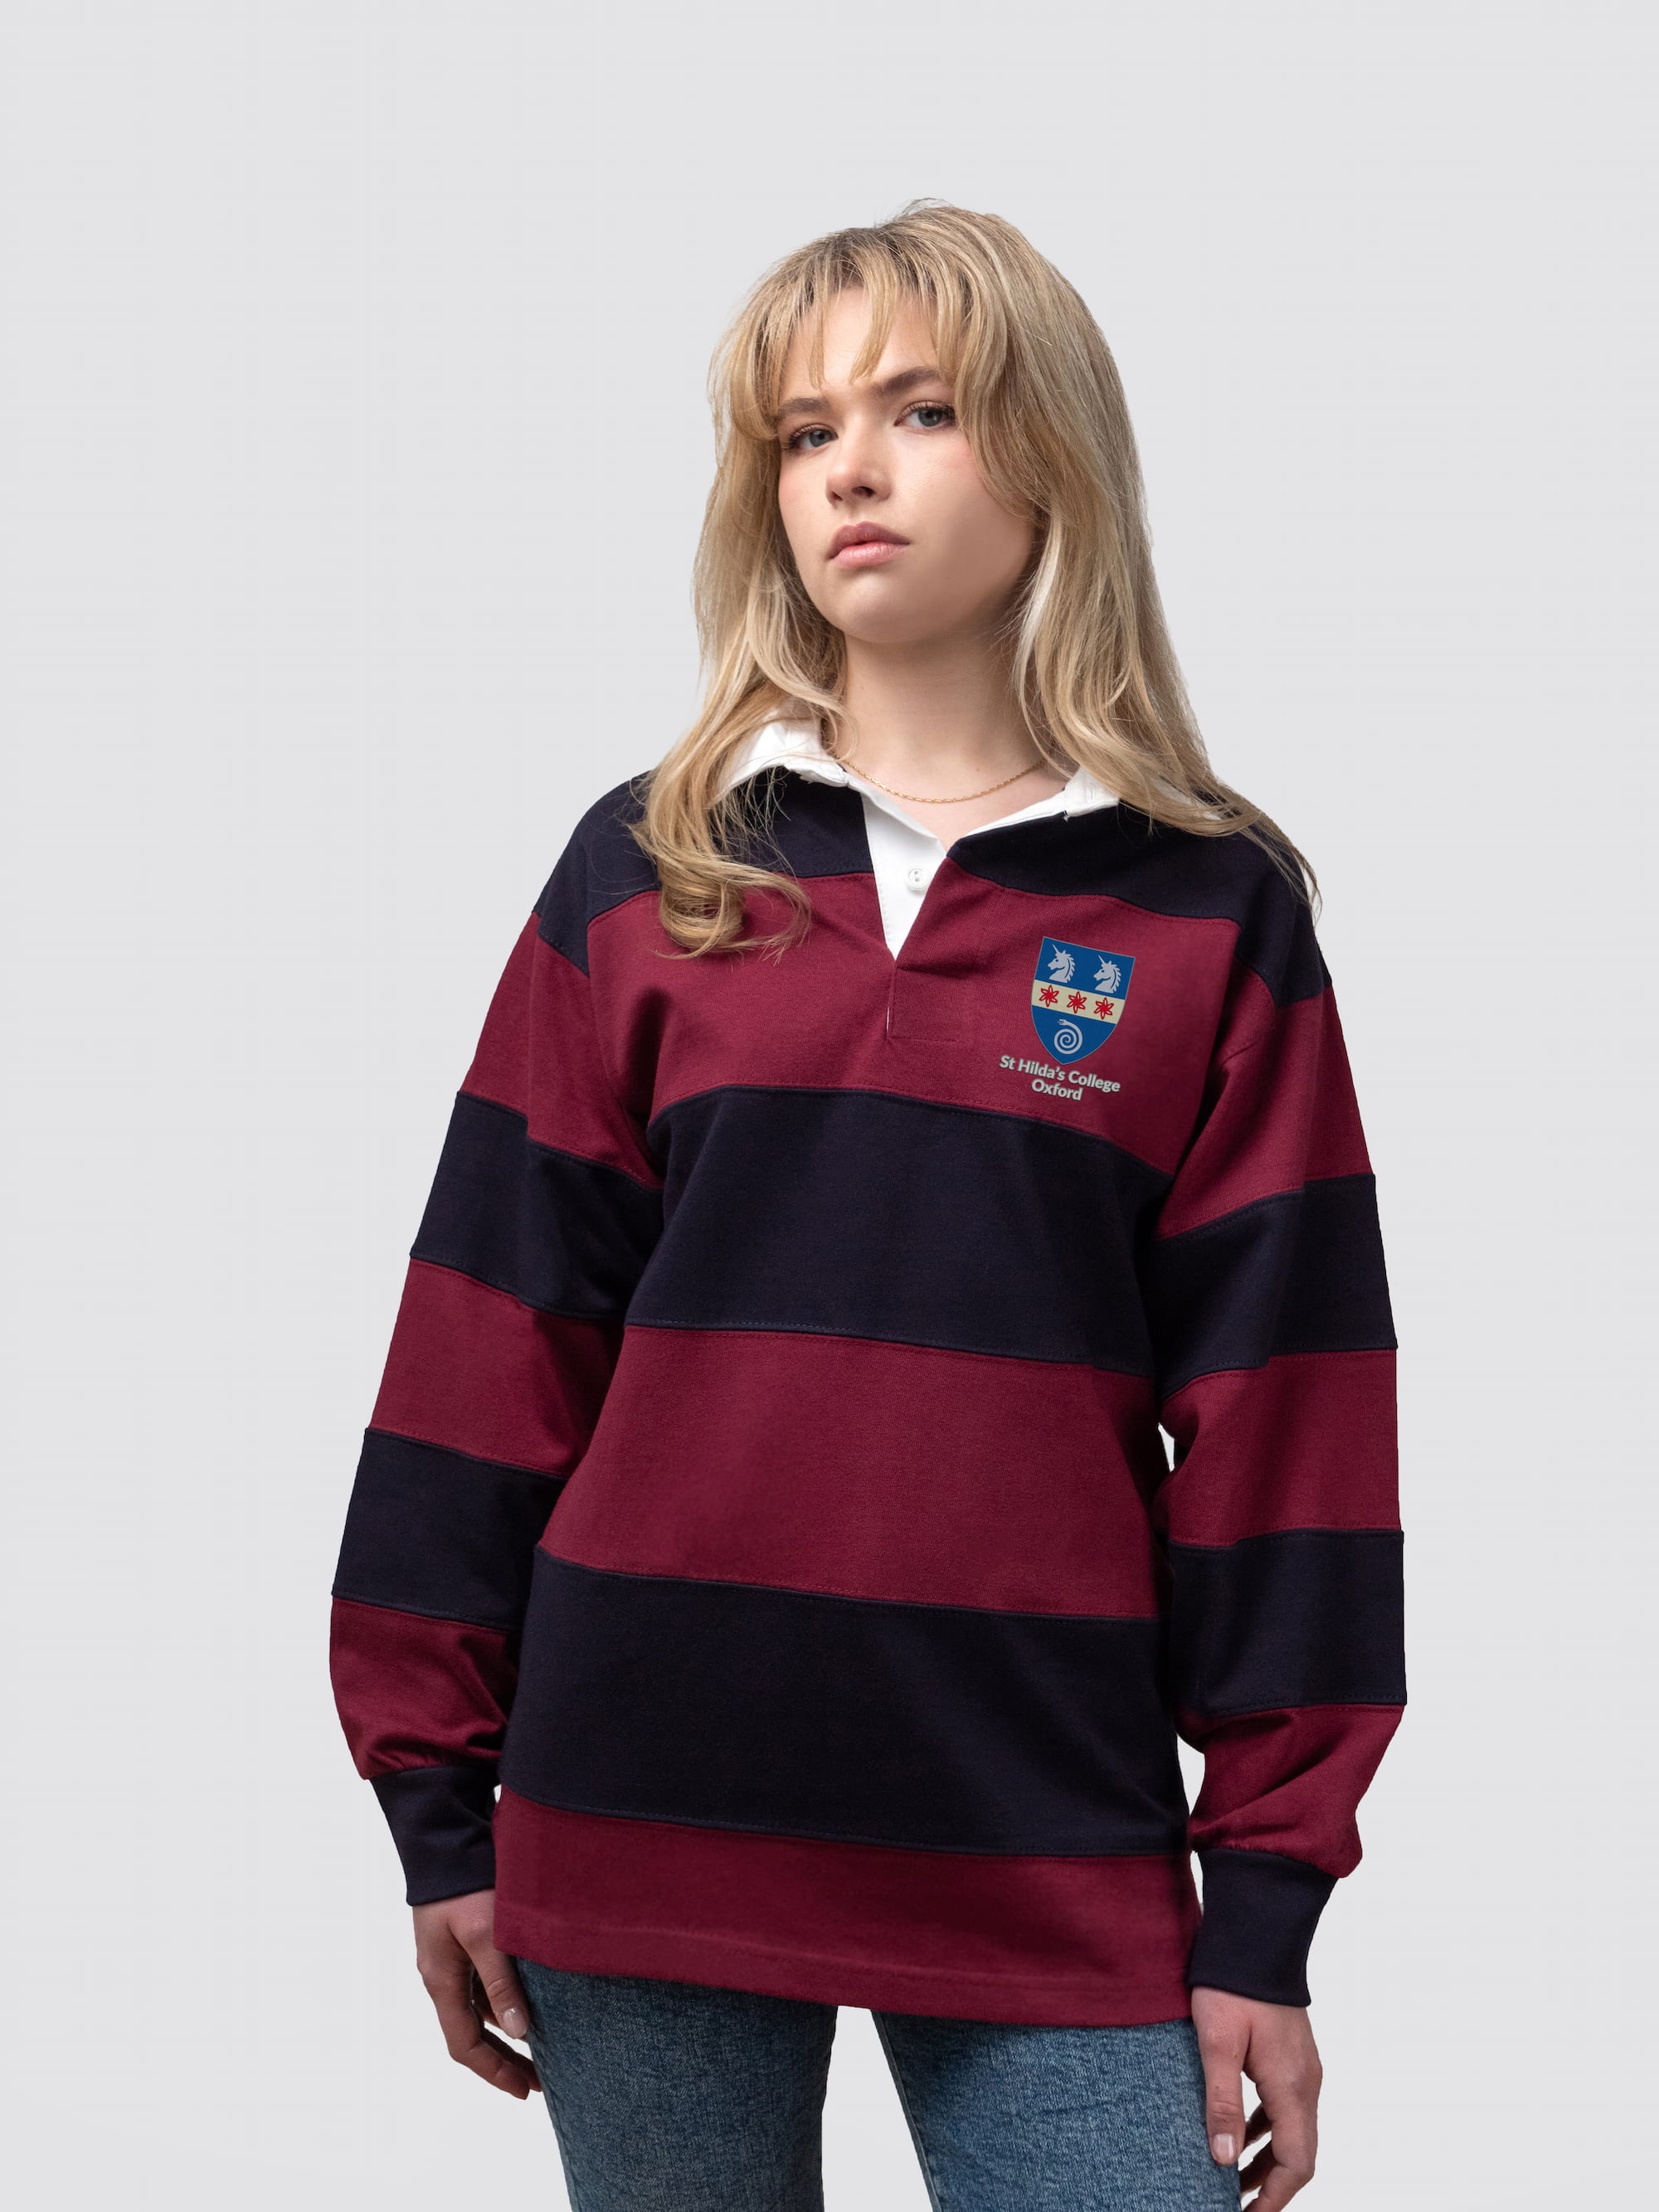 St Hilda's College rugby shirt, with burgundy and navy stripes